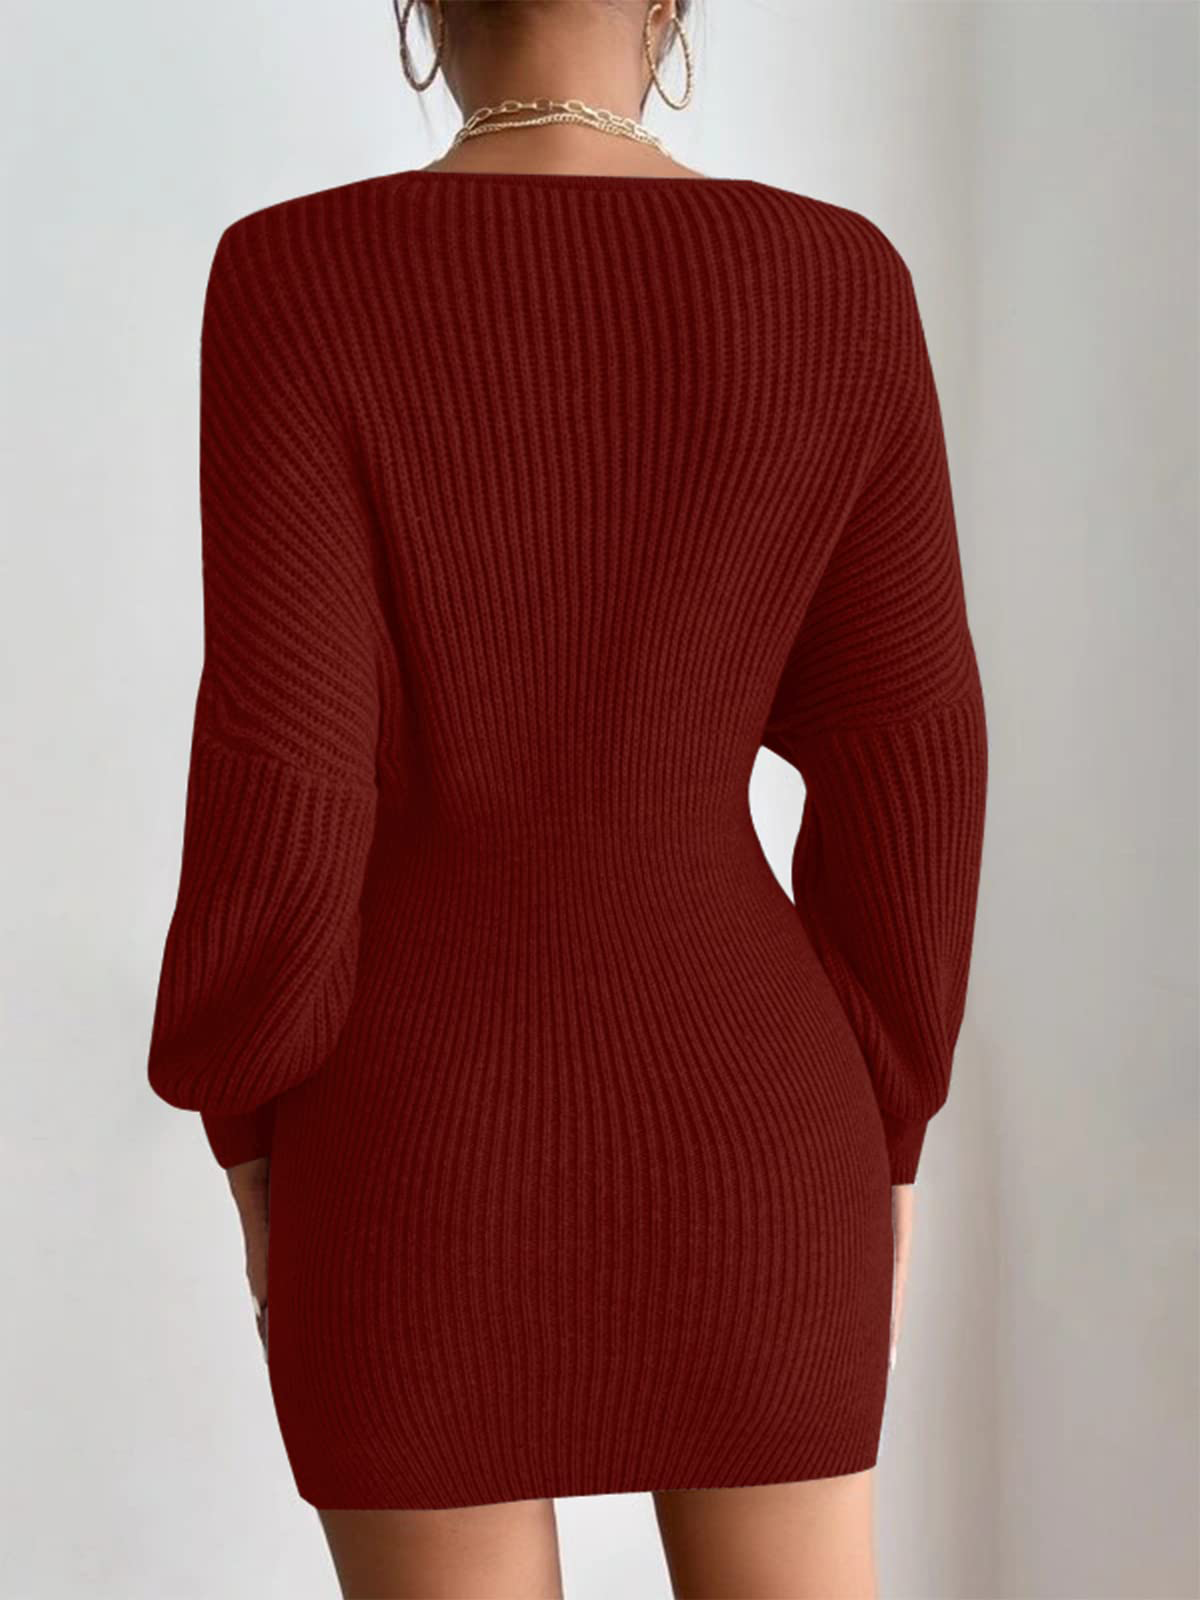 Pleated-Casual-Batwing-Sleeve-Dress-Red-2